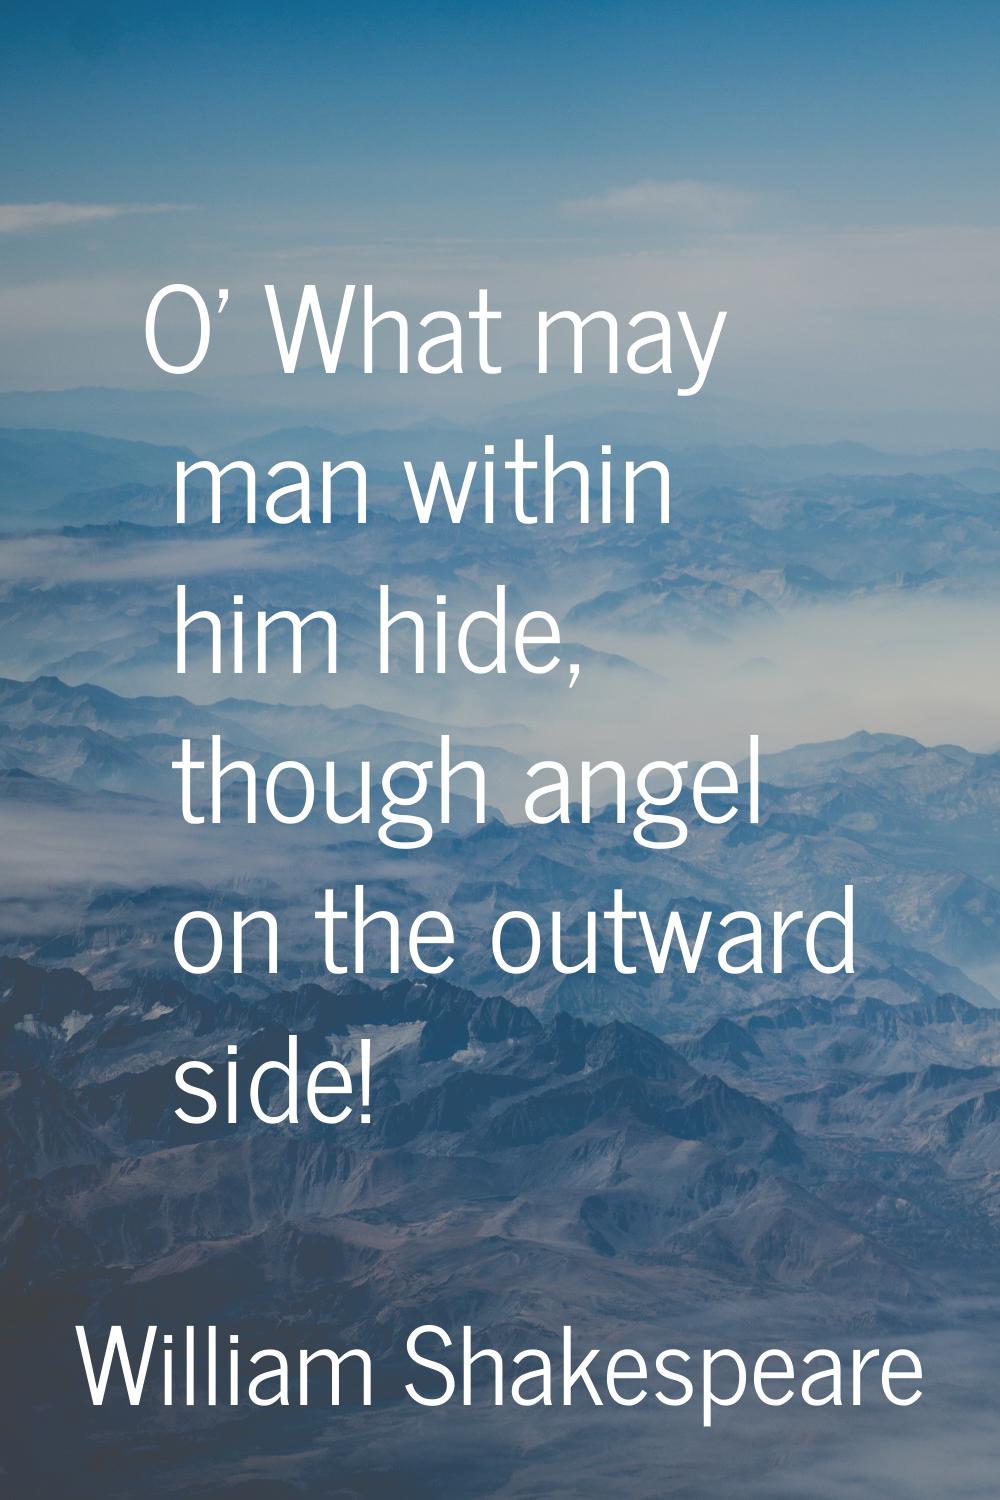 O' What may man within him hide, though angel on the outward side!